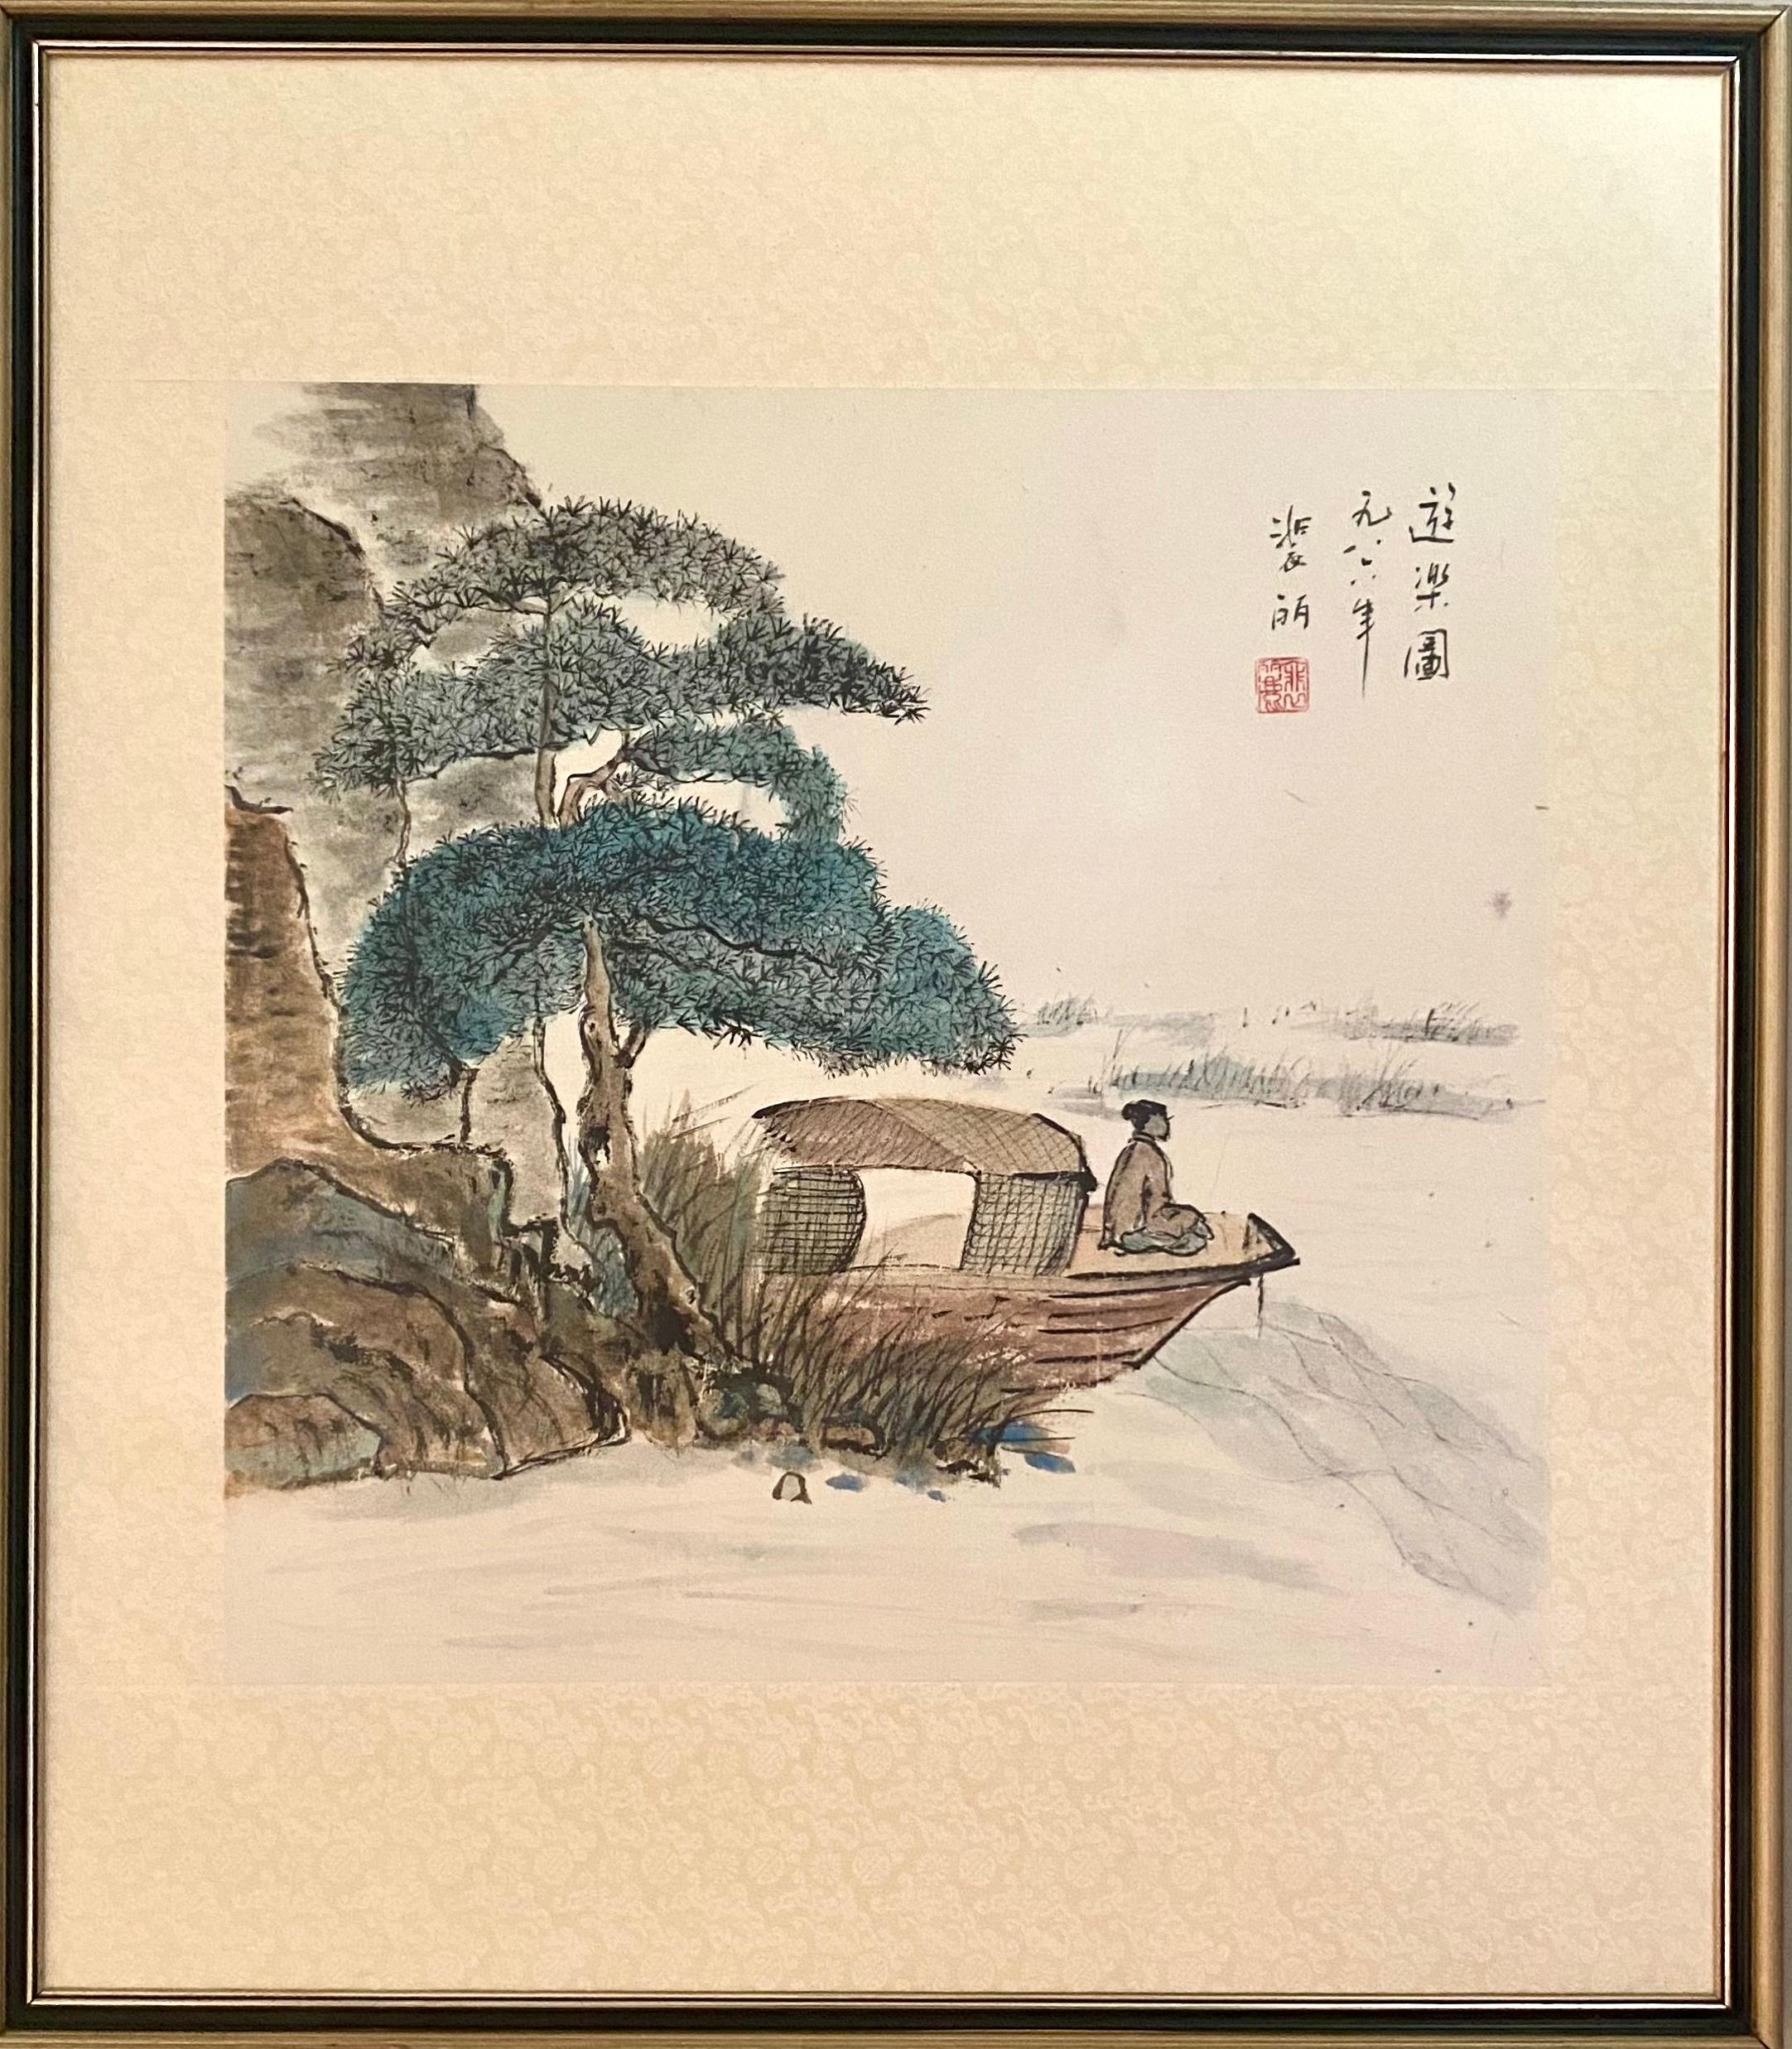 This painting reflects the quiet meditation of a fisherman after a long day's work.

Fereshteh studied the art of Chinese calligraphy and brush painting from 3 masters of Chinese art when she lived in the Far East. Her paintings are colourful and